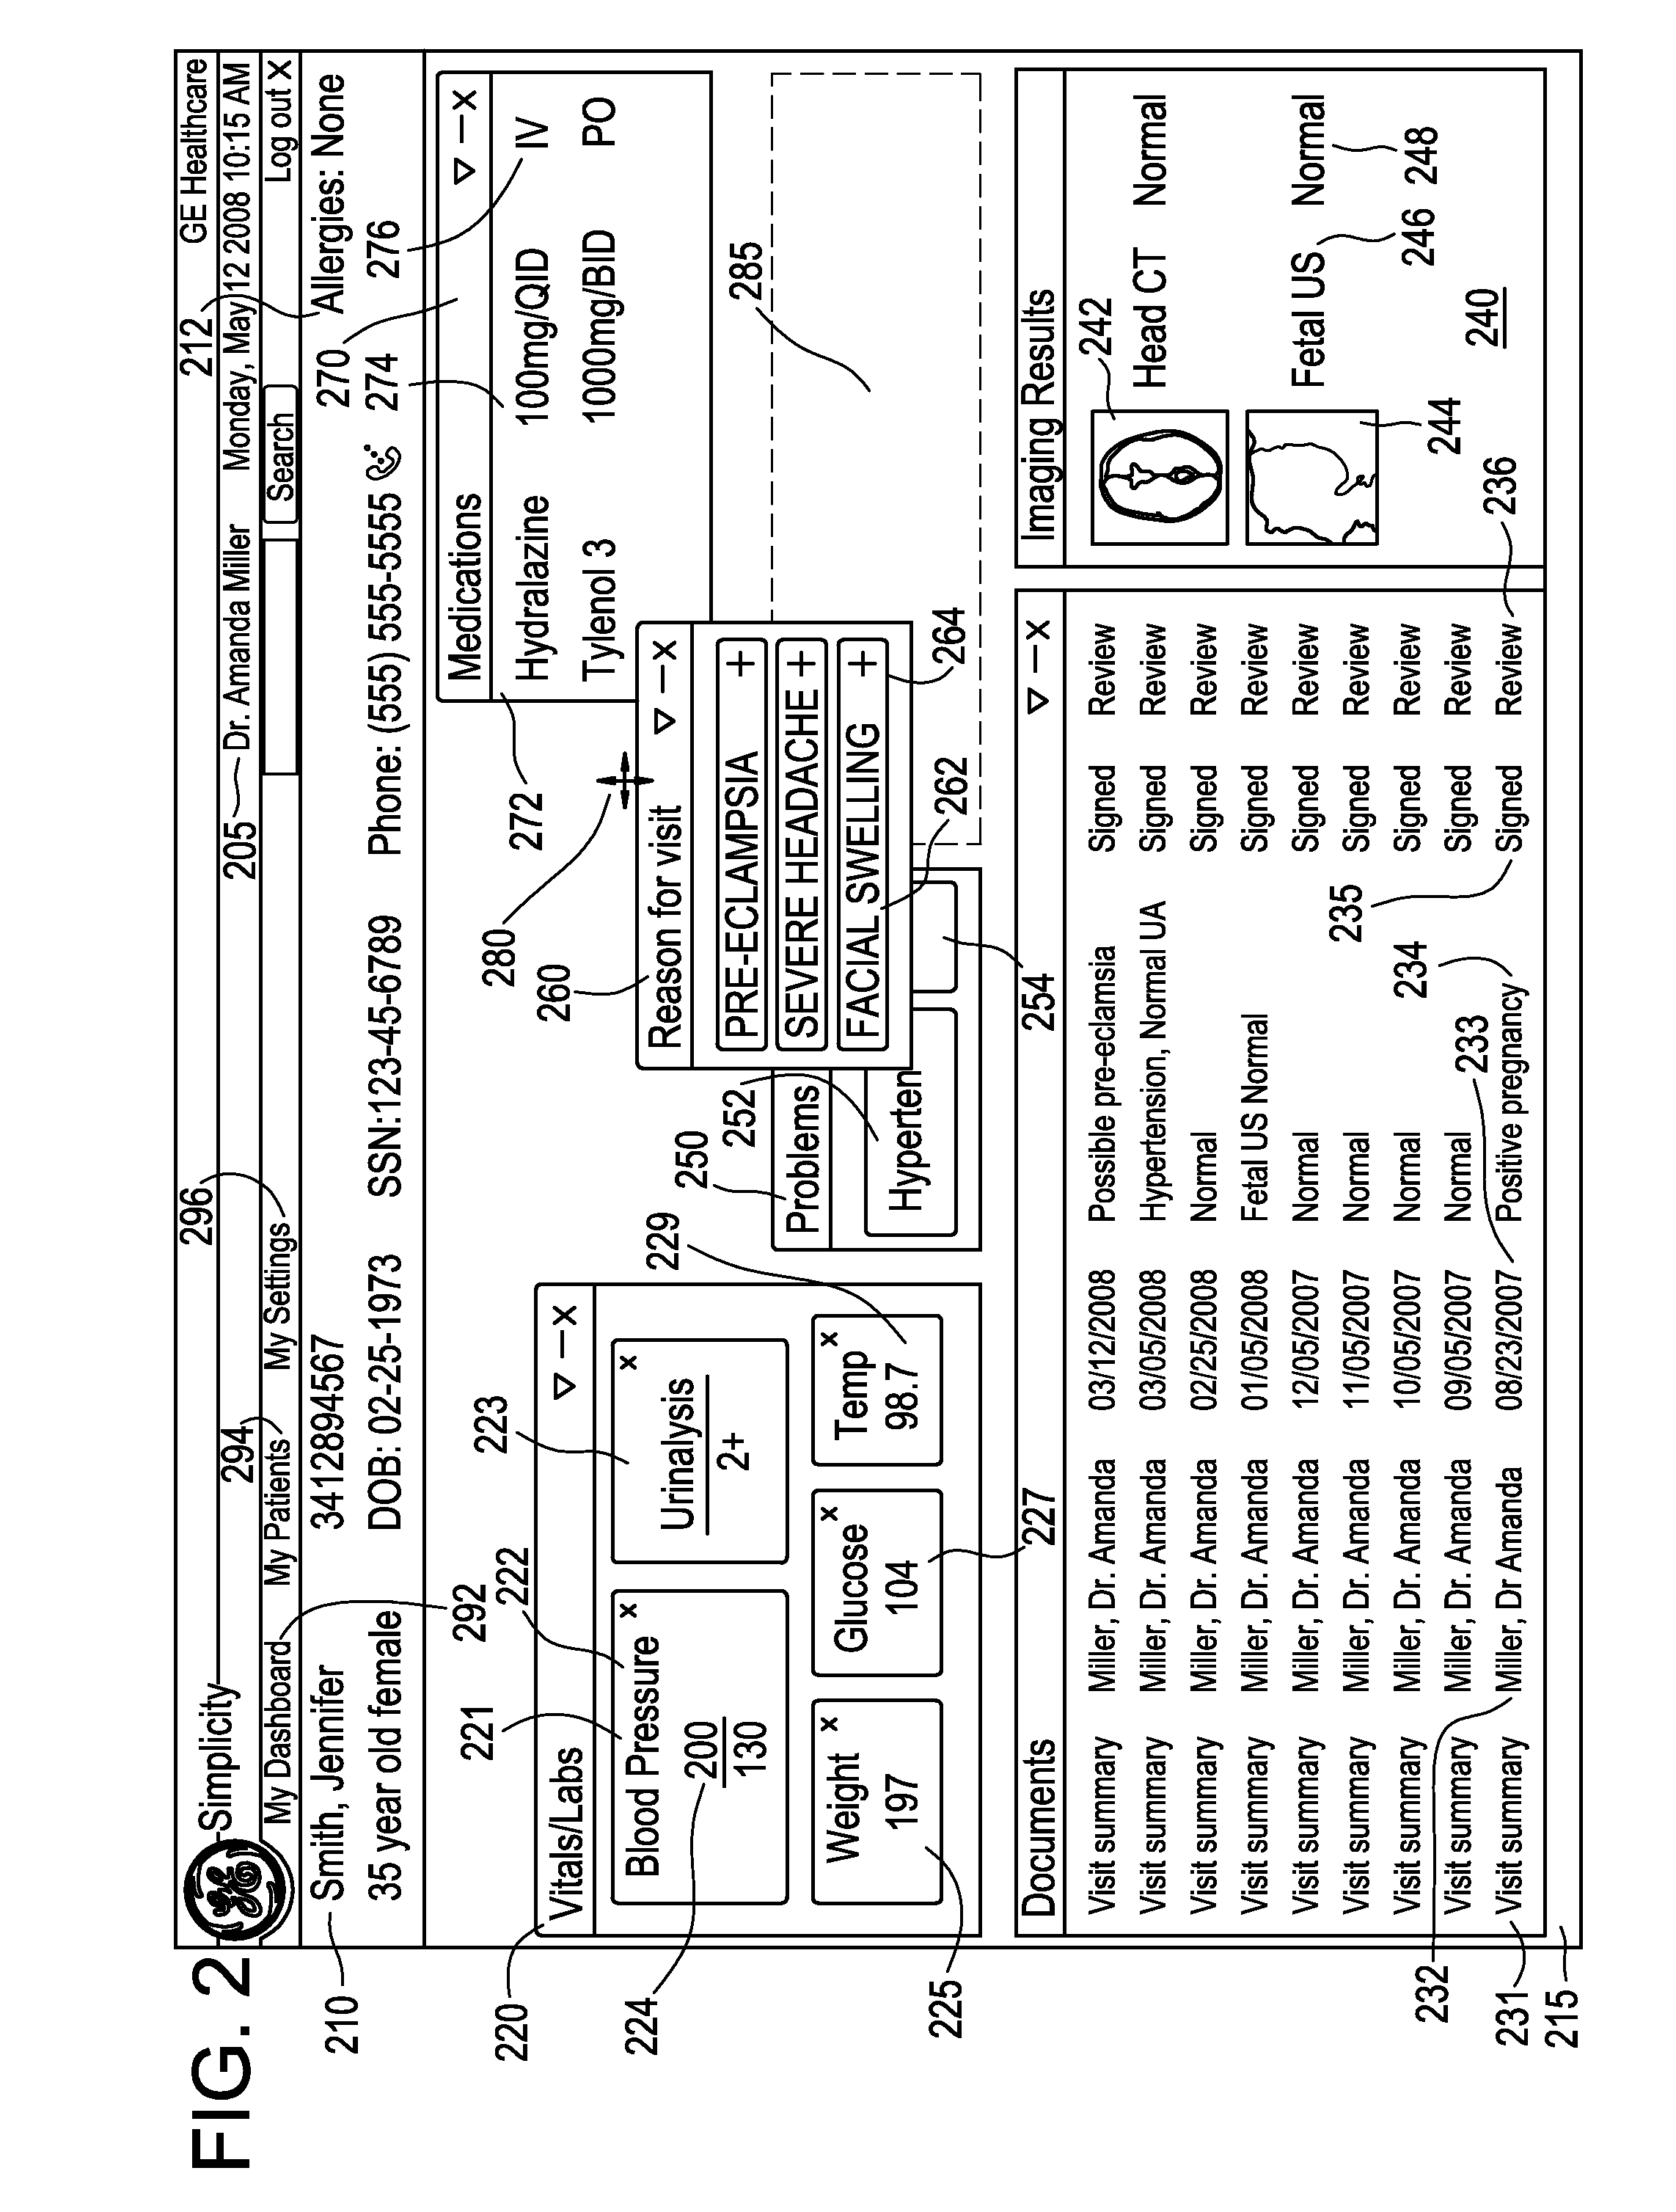 Method and apparatus for clinical widget distribution